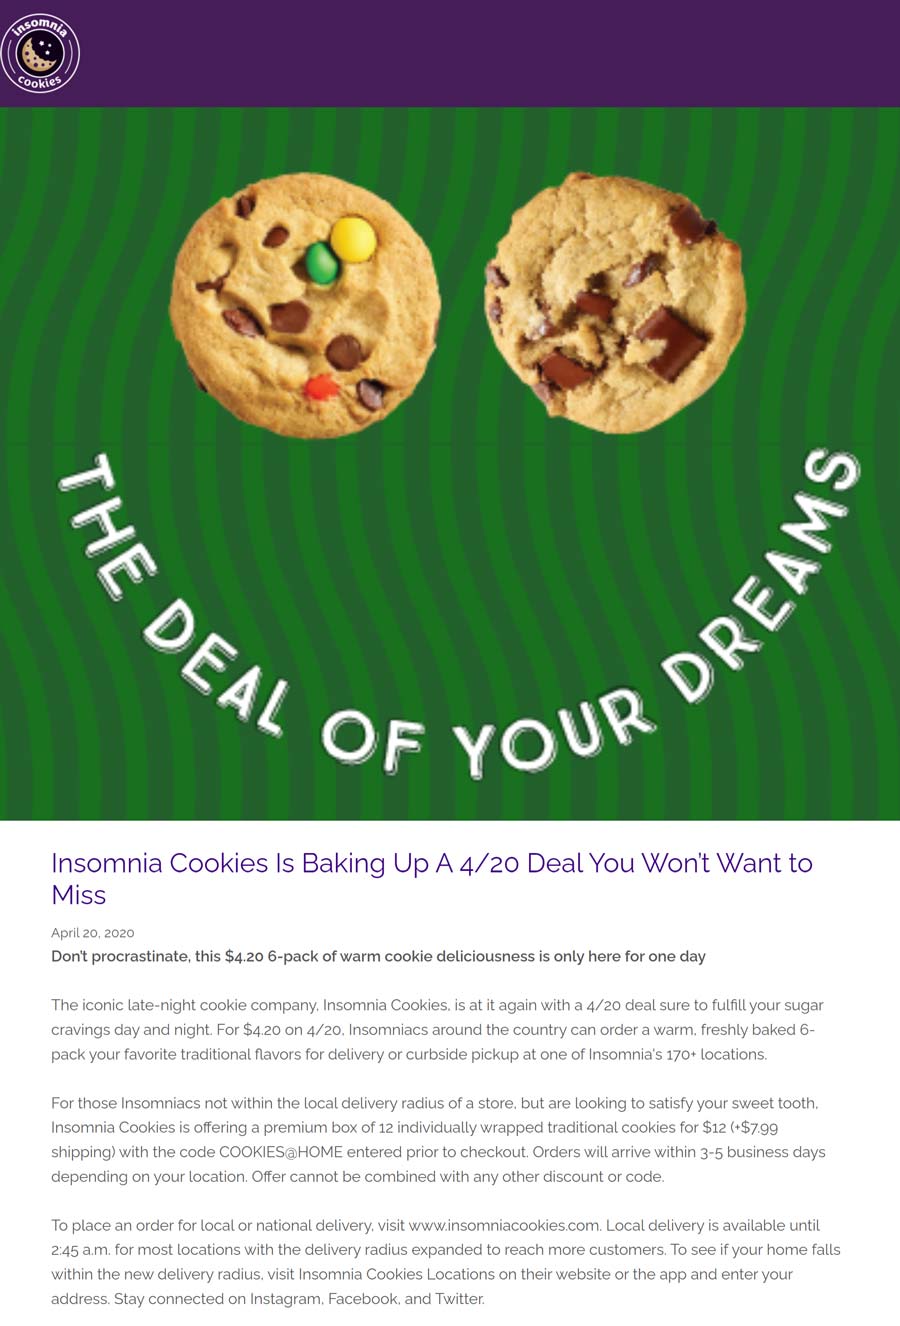 Insomnia Cookies stores Coupon  6 pack of cookies = $4.20 today at Insomnia Cookies #insomniacookies 